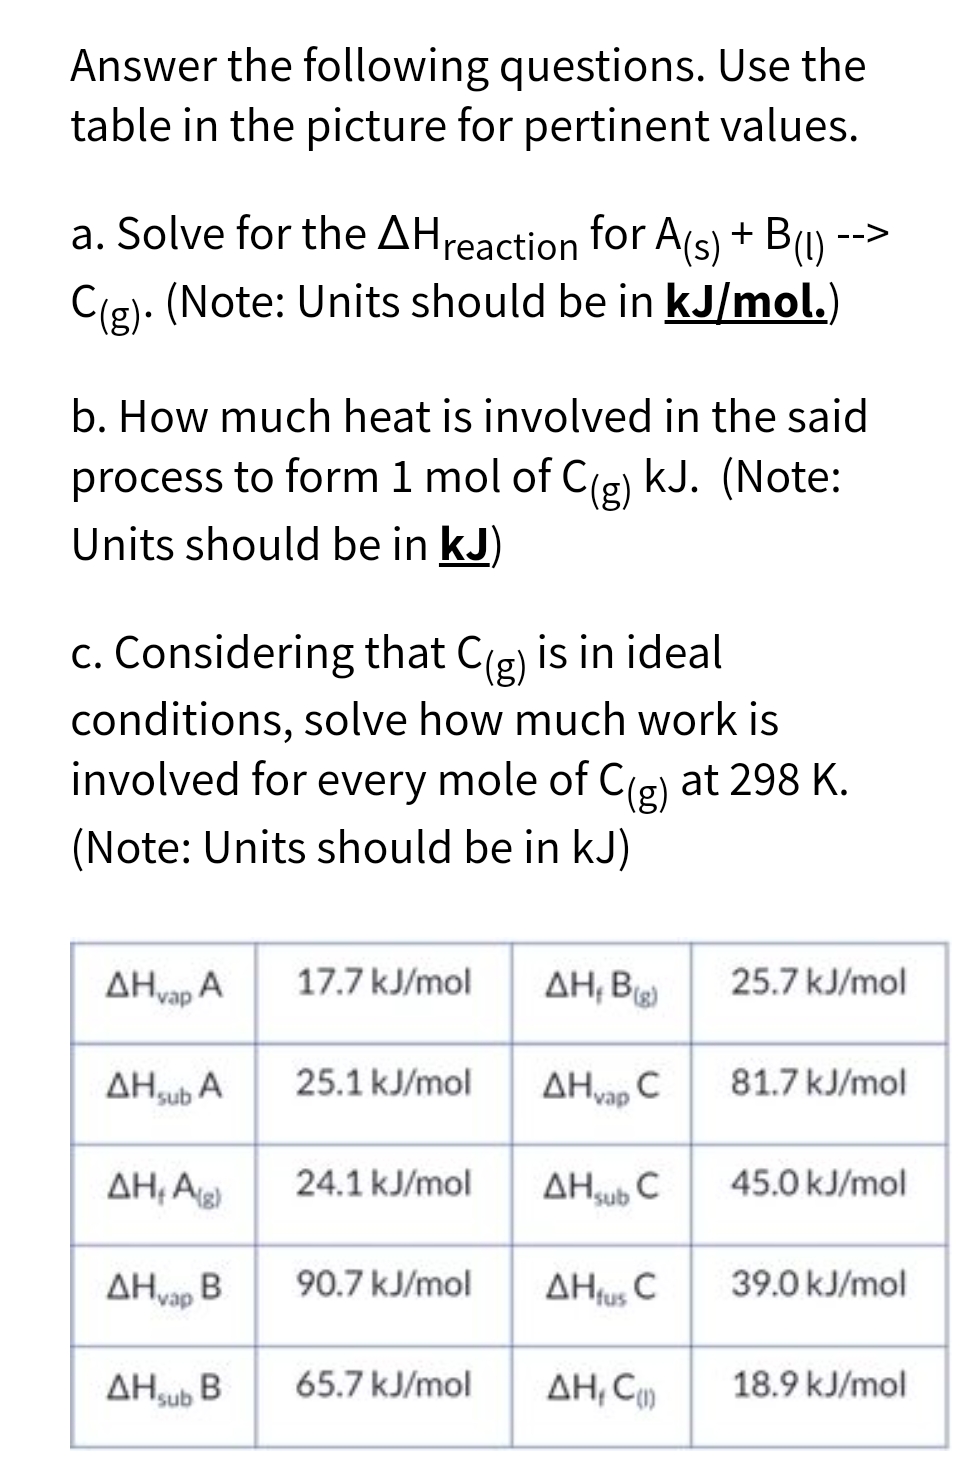 Answer the following questions. Use the
table in the picture for pertinent values.
a. Solve for the AH reaction for A(s) + B(1)
C(g). (Note: Units should be in kJ/mol.)
b. How much heat is involved in the said
process to form 1 mol of C(g) kJ. (Note:
Units should be in kJ)
c. Considering that C(g) is in ideal
conditions, solve how much work is
involved for every mole of C(g) at 298 K.
(Note: Units should be in kJ)
AHvap A
AHsub A
AH,Ag)
17.7 kJ/mol
25.1 kJ/mol
24.1 kJ/mol
ΔΗ,
AHvap B
AHSub B 65.7 kJ/mol
90.7 kJ/mol
AH, B
AHvap C
AH sub C
-->
AHfus C
AH, C
25.7 kJ/mol
81.7 kJ/mol
45.0 kJ/mol
39.0 kJ/mol
18.9 kJ/mol